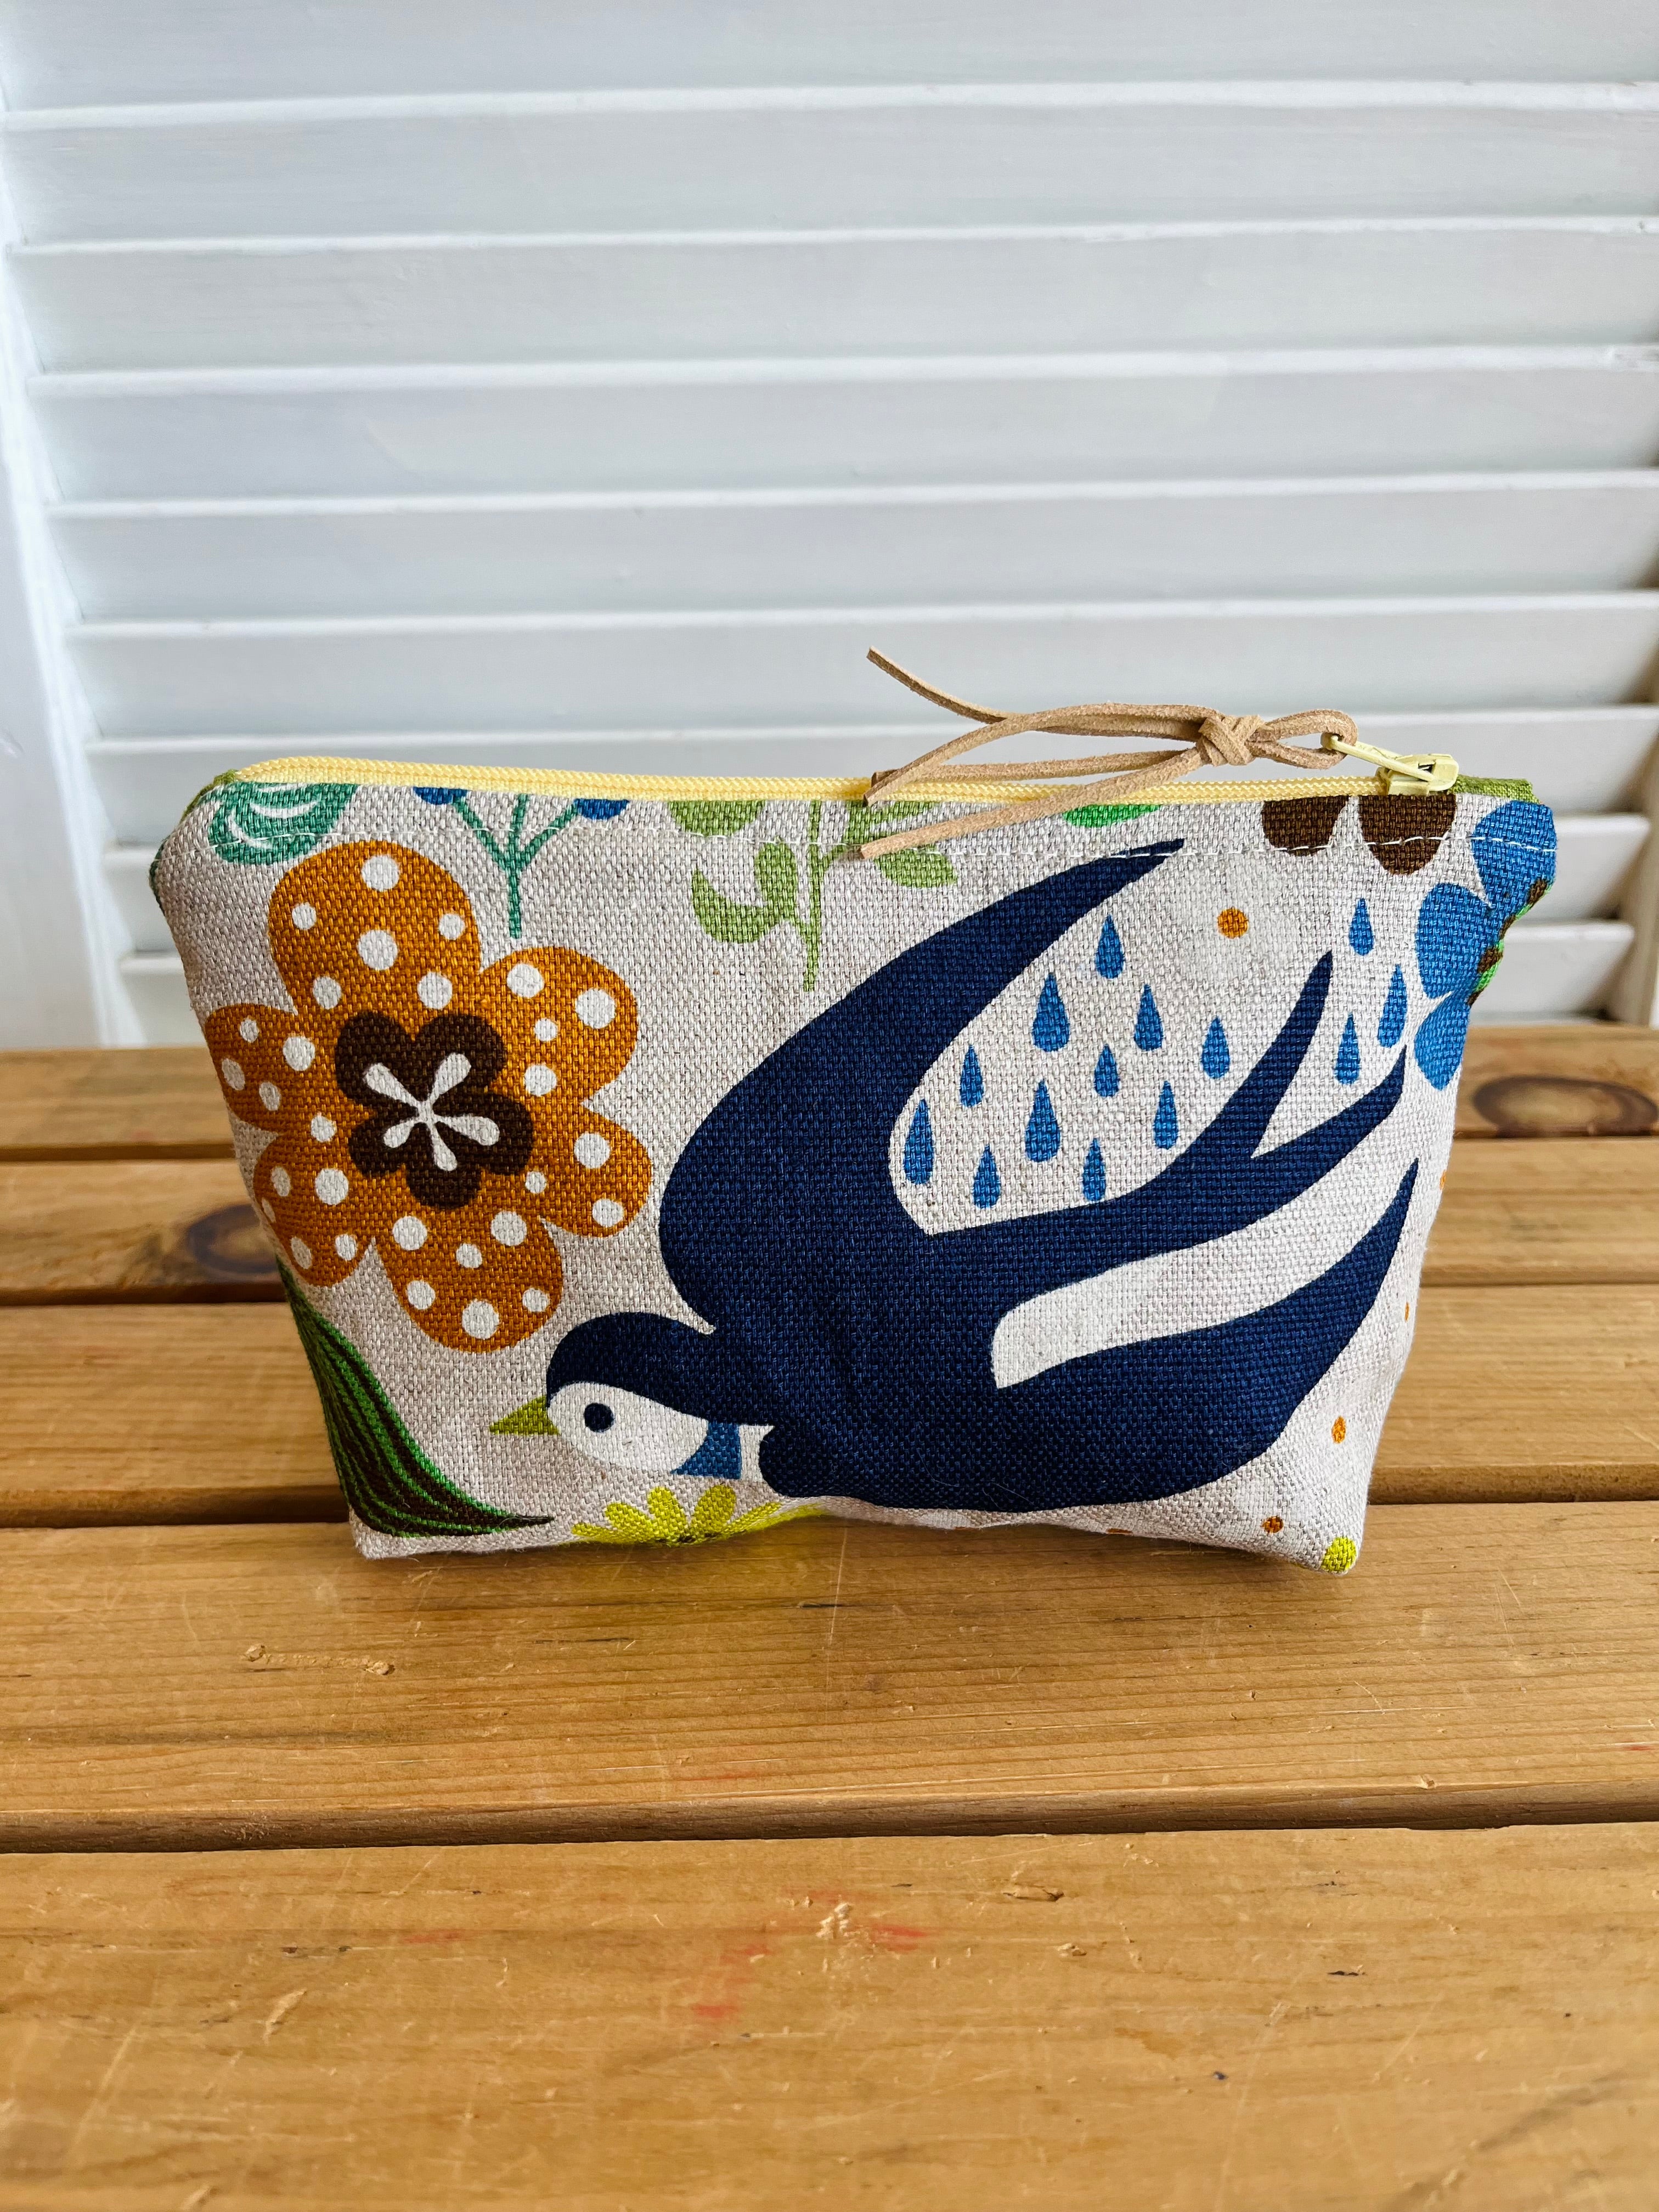 Zipper Pouch from Hot Thommolly